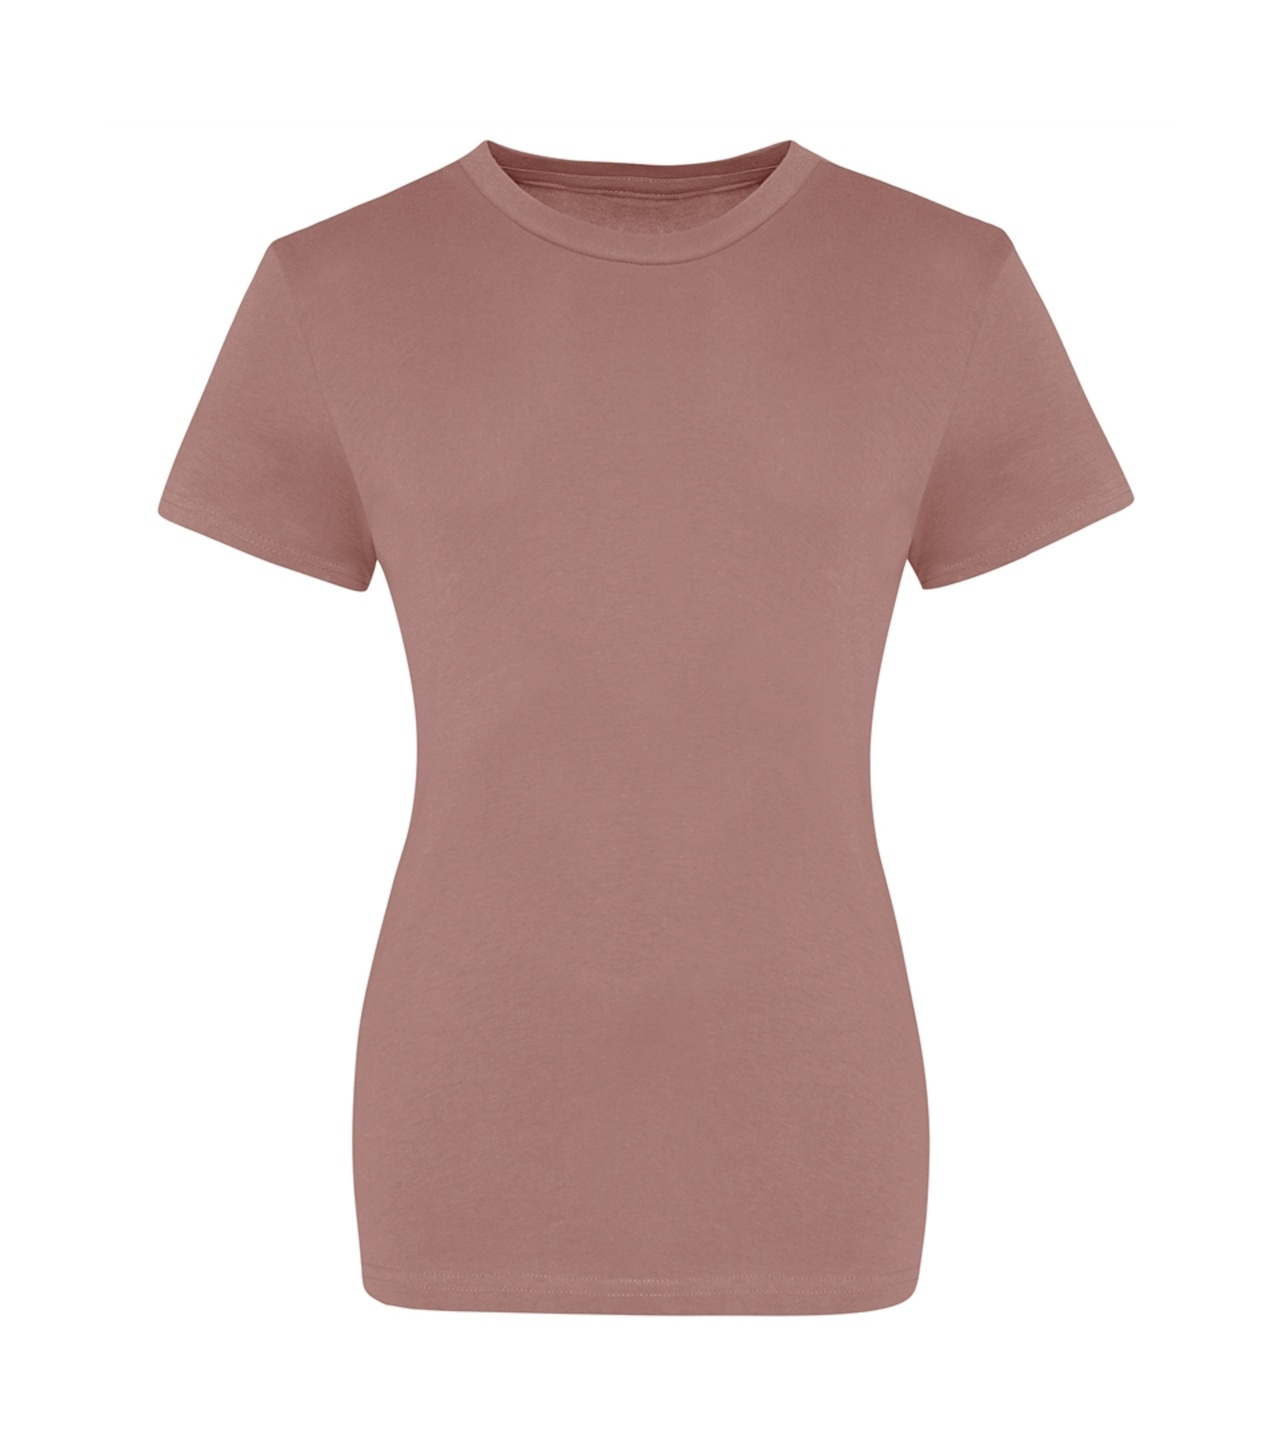 Just Ts The 100 Women's T - Dusty Pink - S